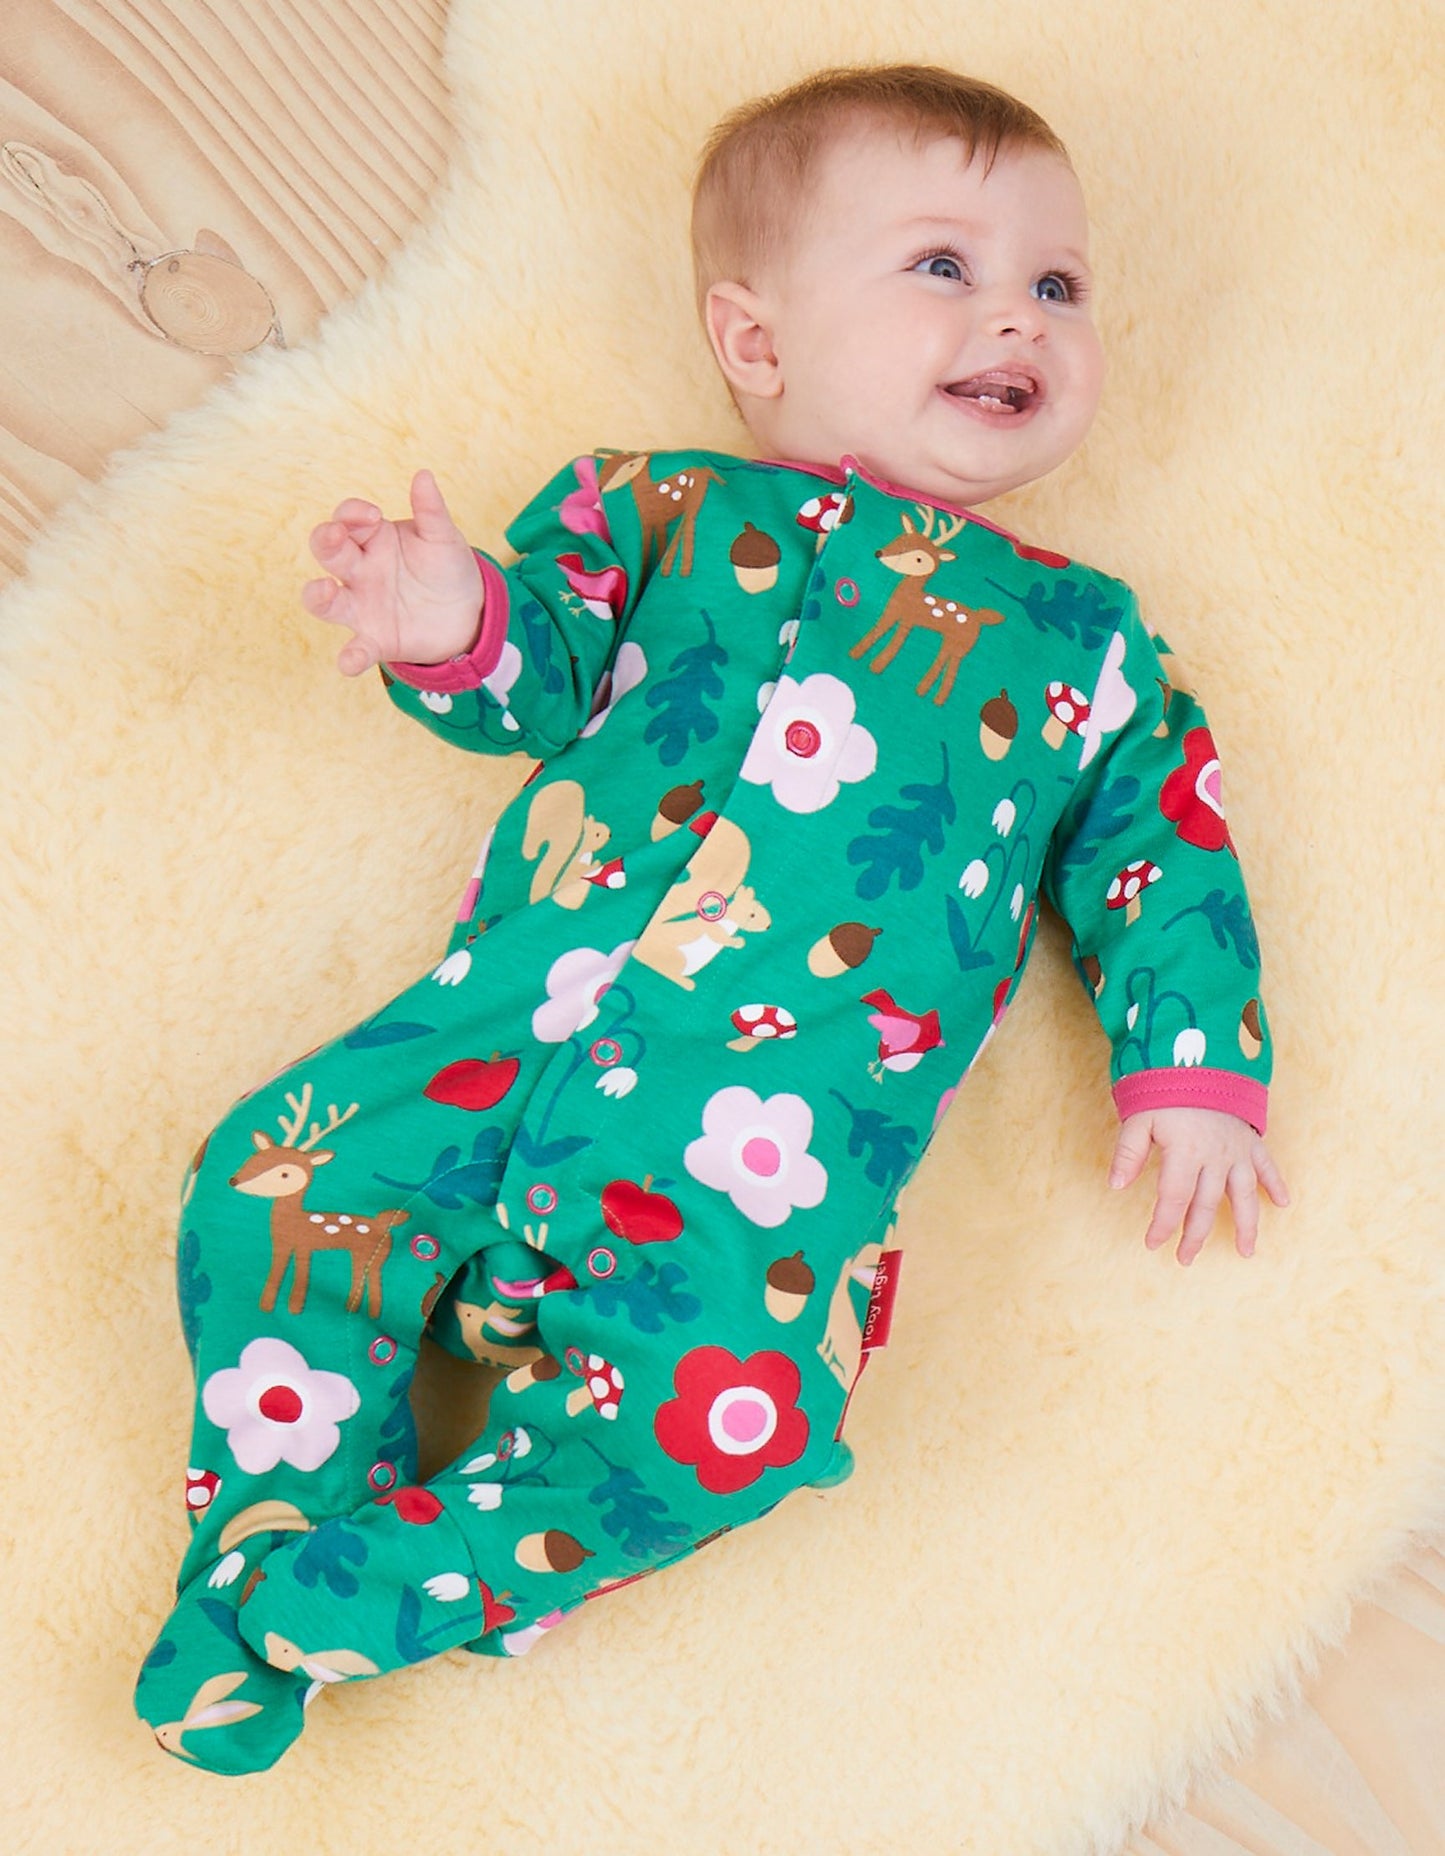 Pajamas with forest print made from organic cotton, closed feet